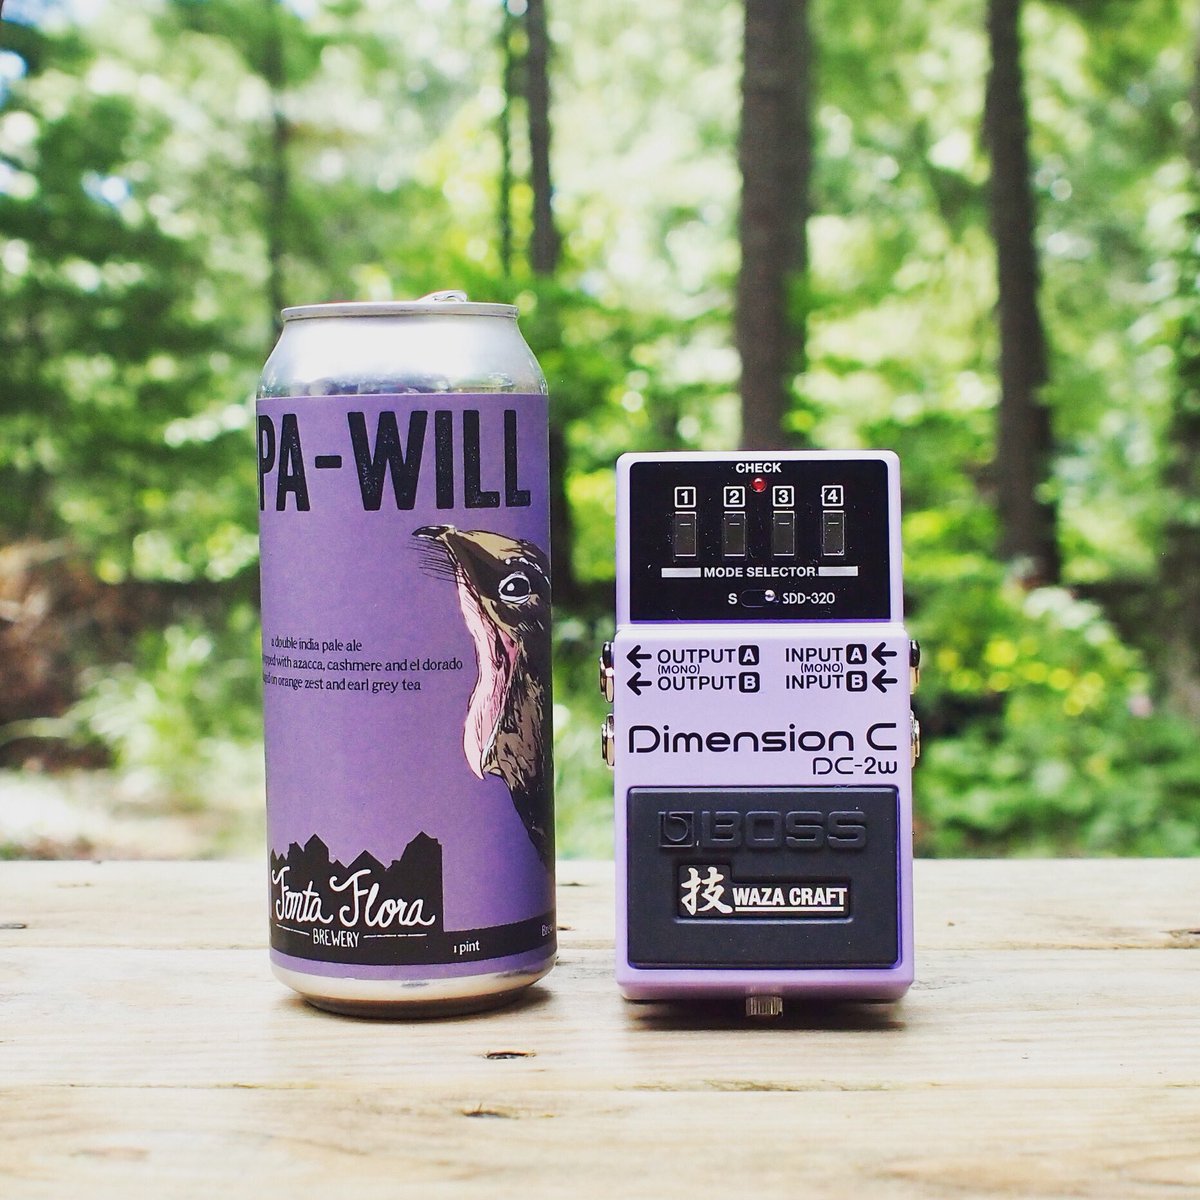 A @FontaFloraBrew DIPA-WILL paired with the DC-2W Dimension C  from @BossFX_US 
.
#beer #pedals #beerlover #pedalsandeffects #effects #pedals #effectspedals #craftbeer #pedaloftheday #fontaflora #TGIF #dipa #boss #dimensionc #ipa